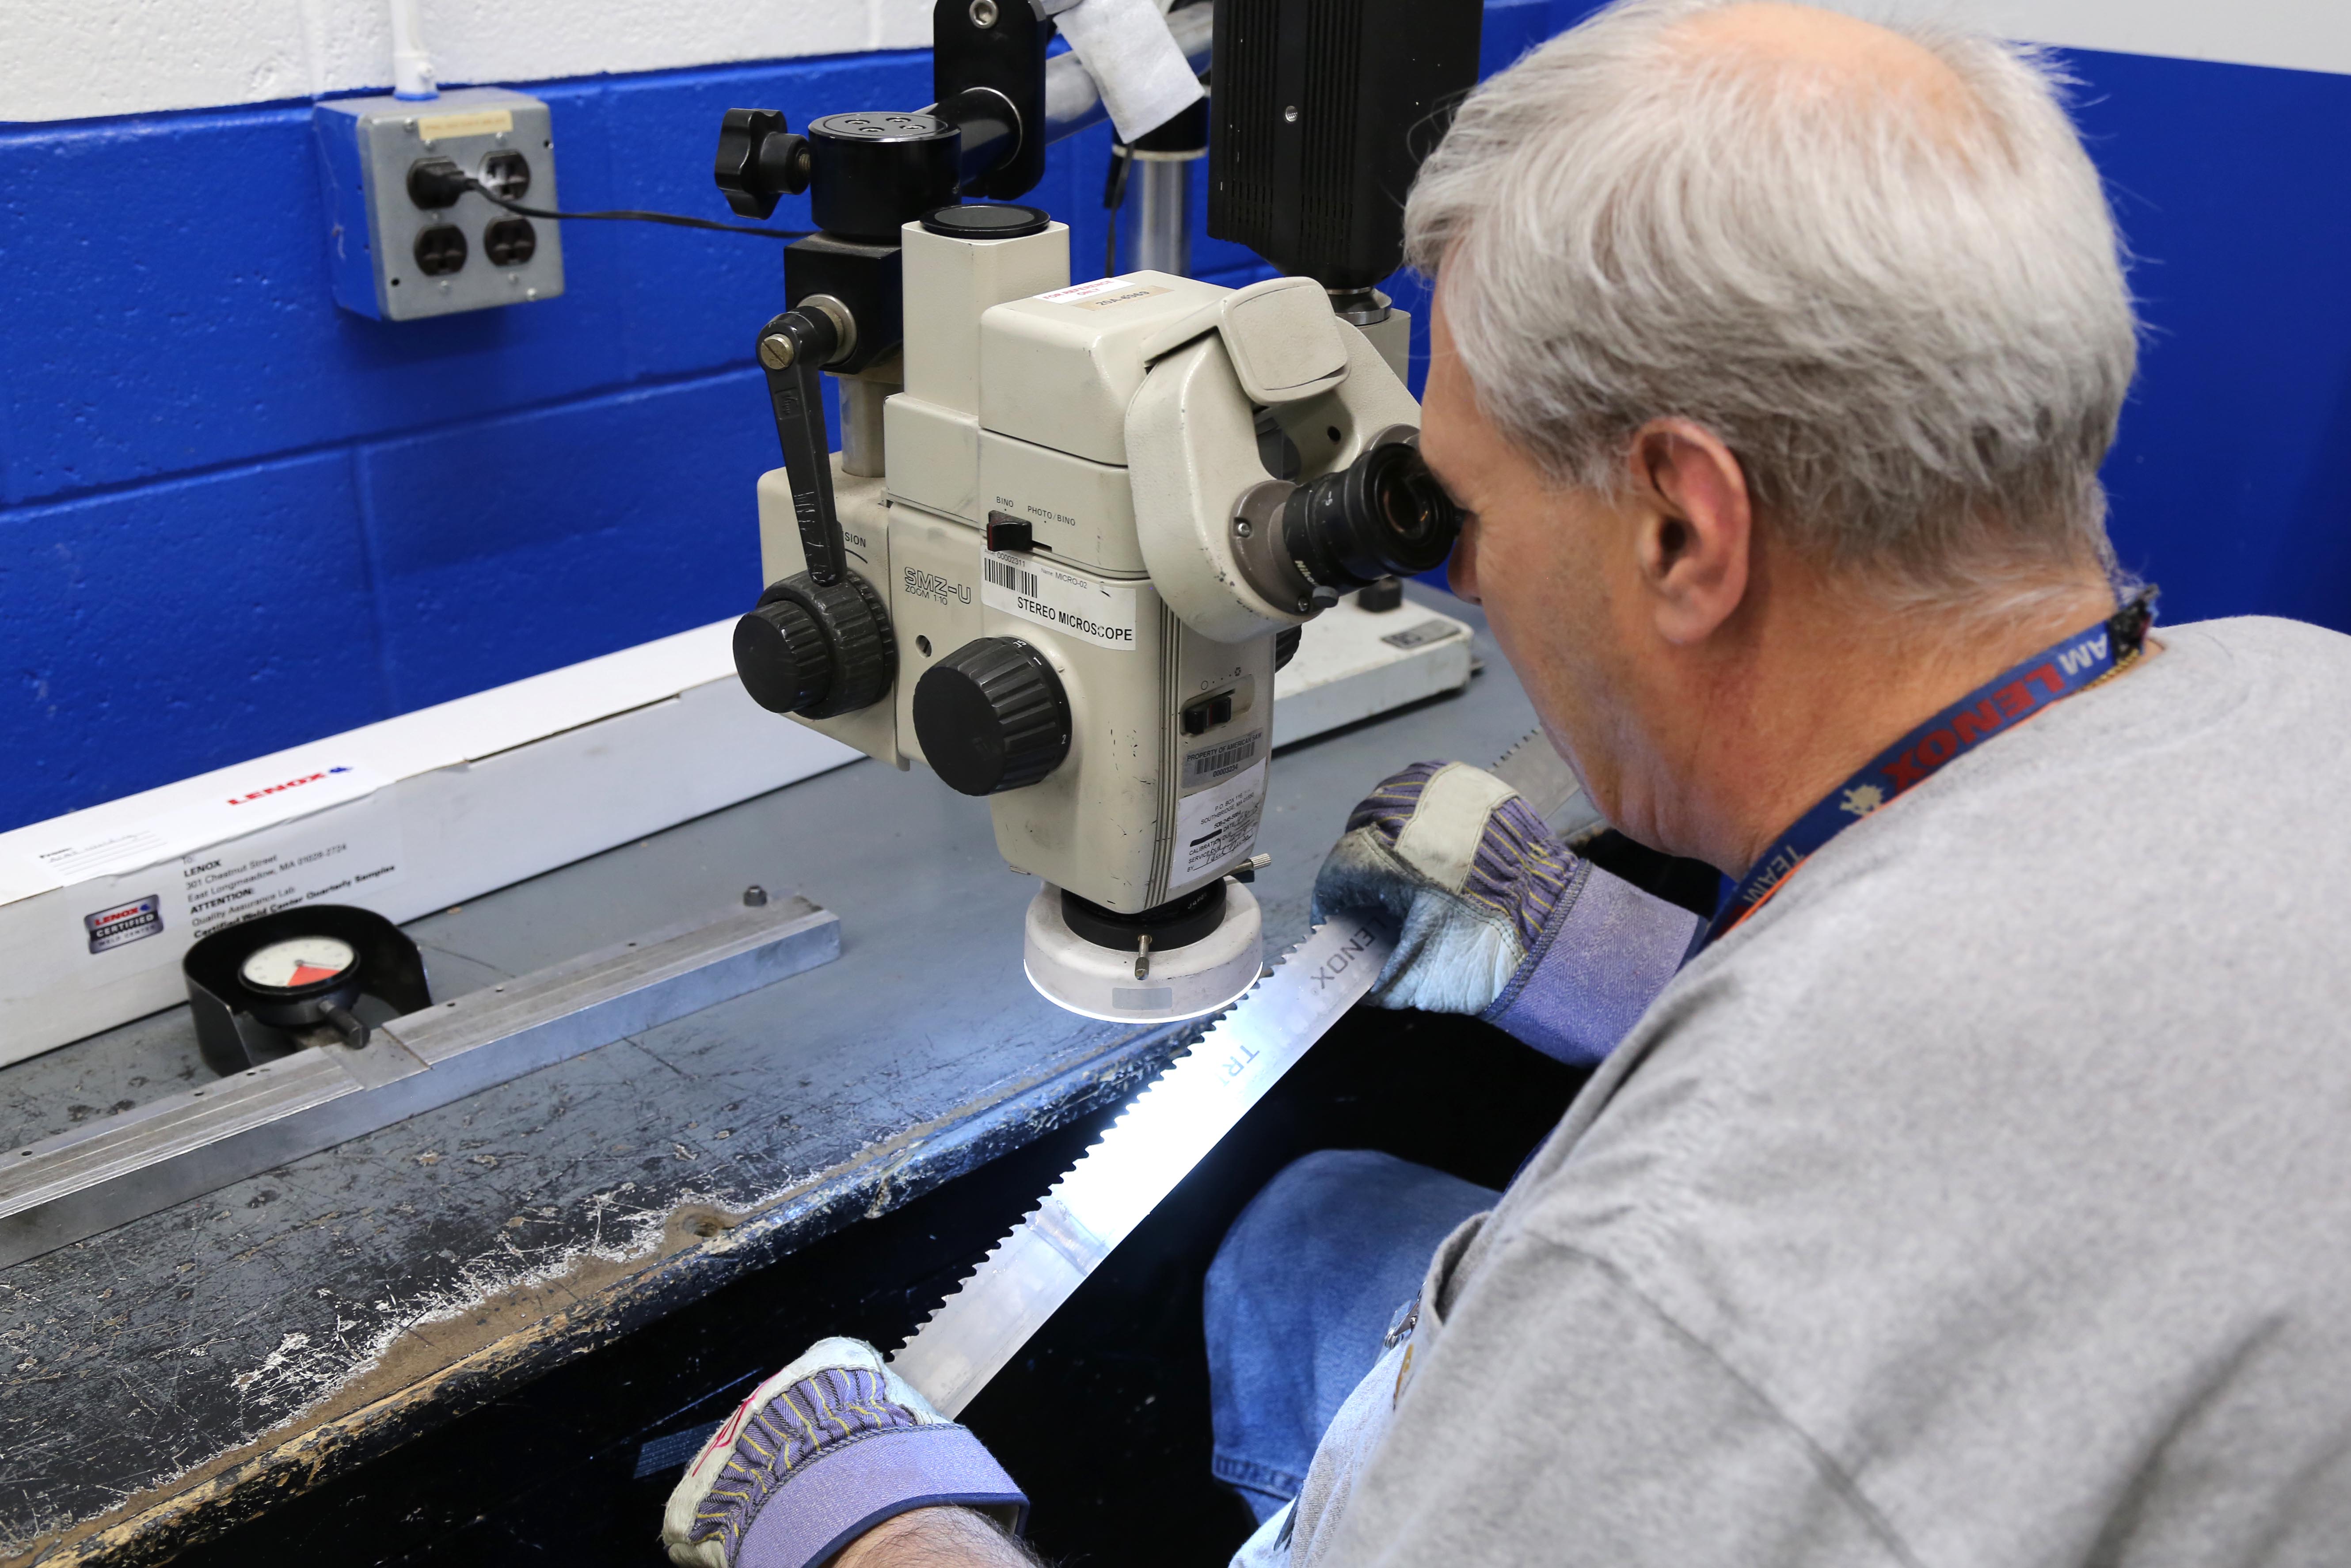 A QA technician inspects a blade at the Lenox Quality Assurance Lab.